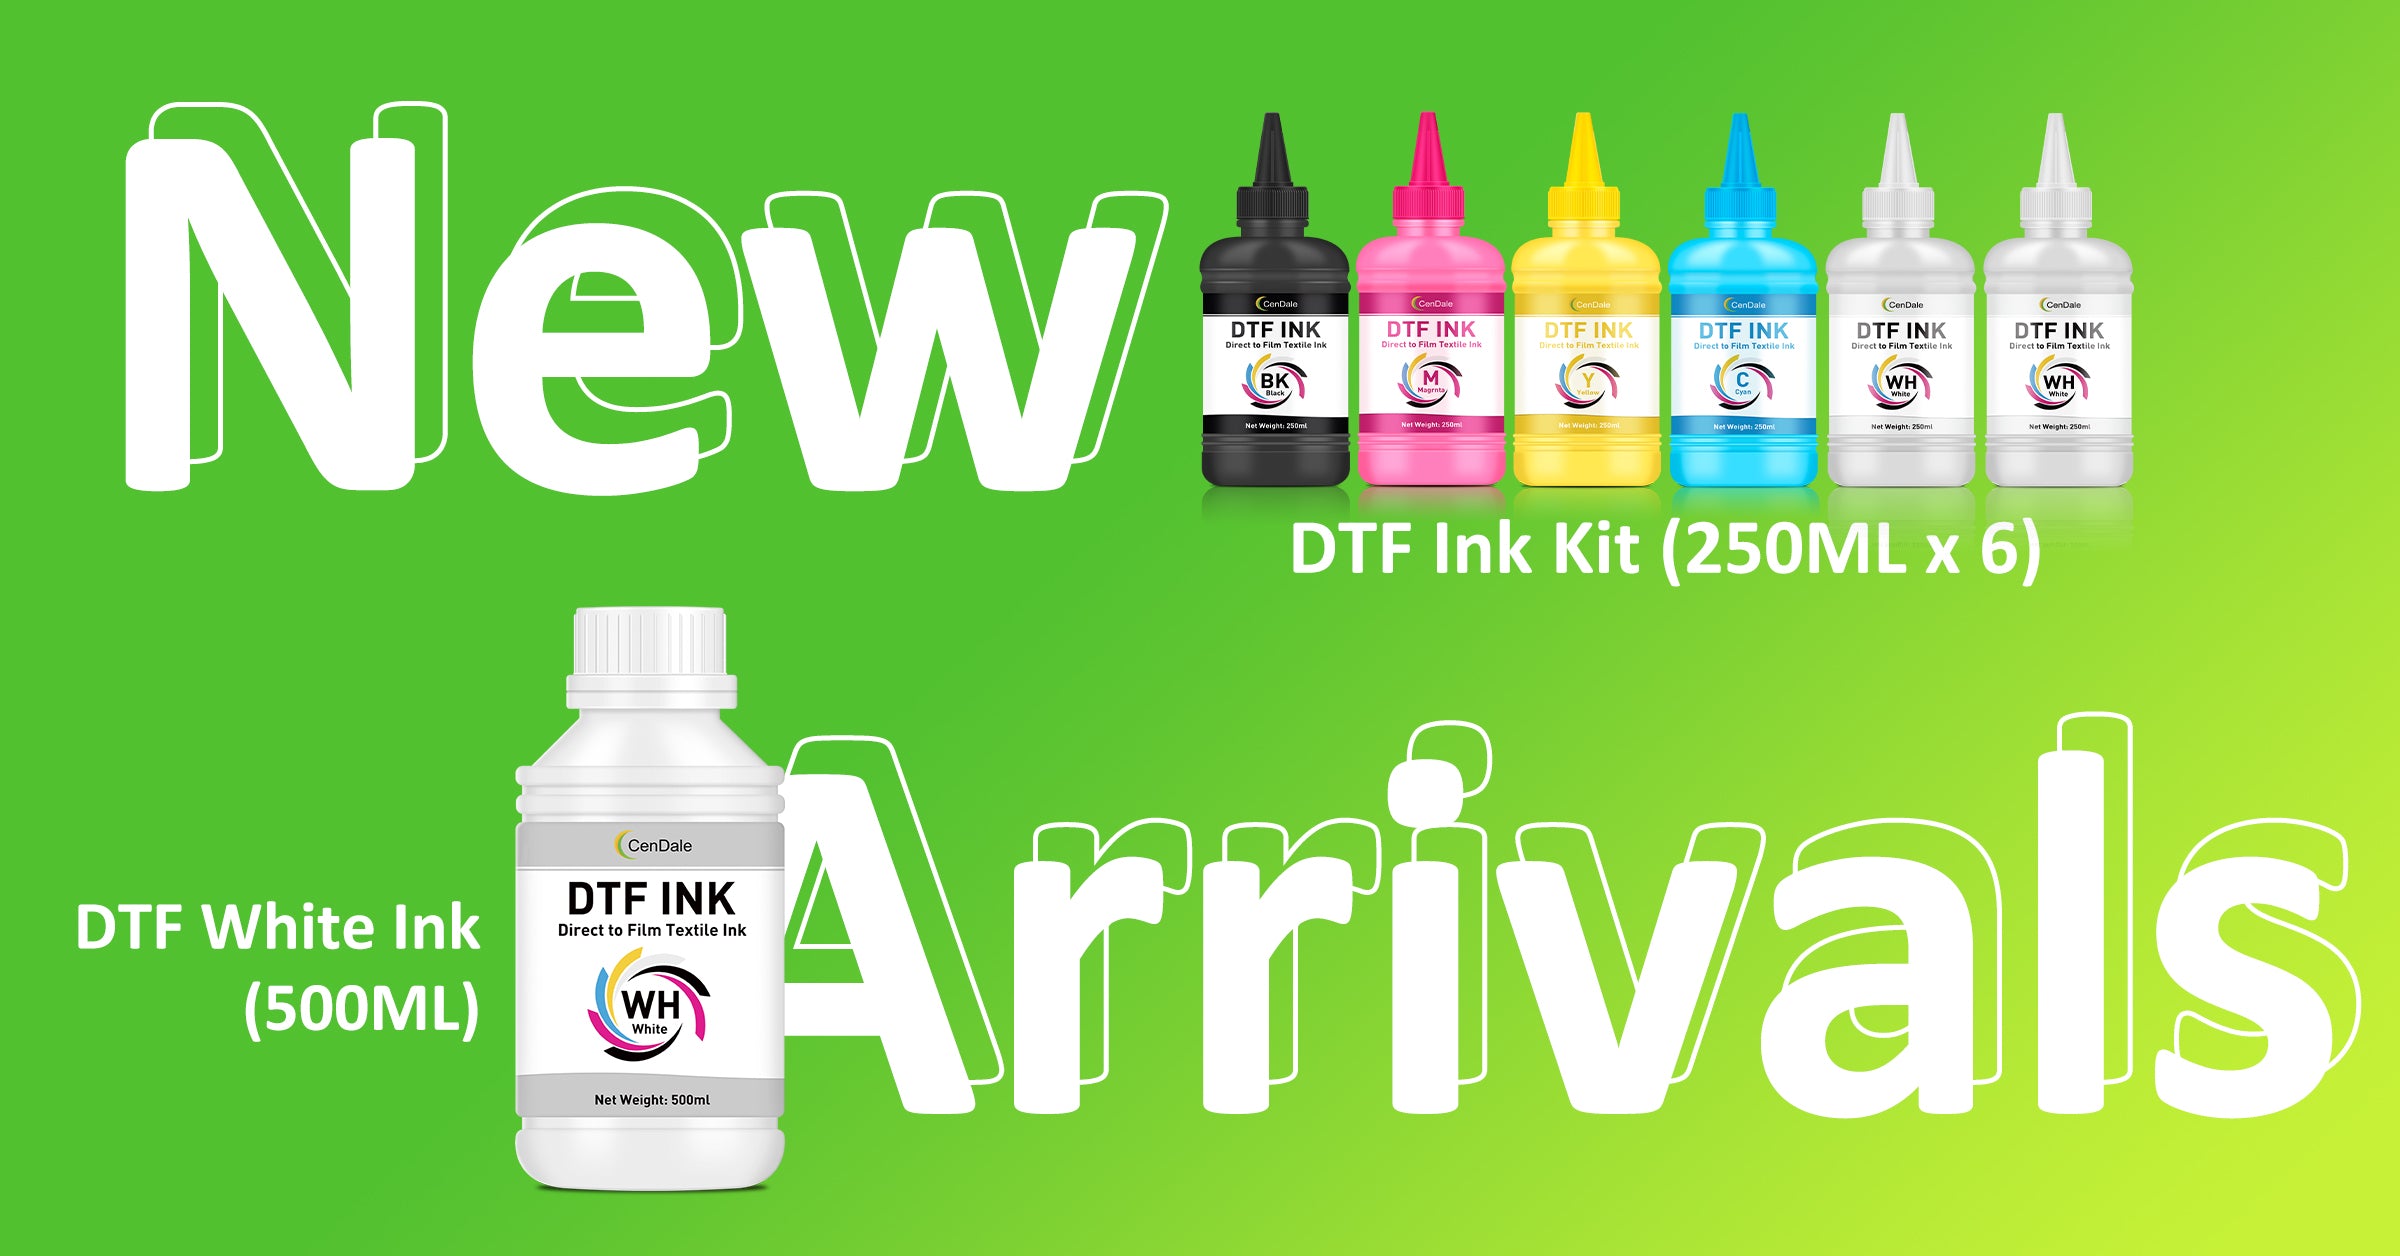 CenDale DTF Ink Direct to Film Textile Ink 100 ml BK Y WH : Buy Online in  the UAE, Price from 555 EAD & Shipping to Dubai